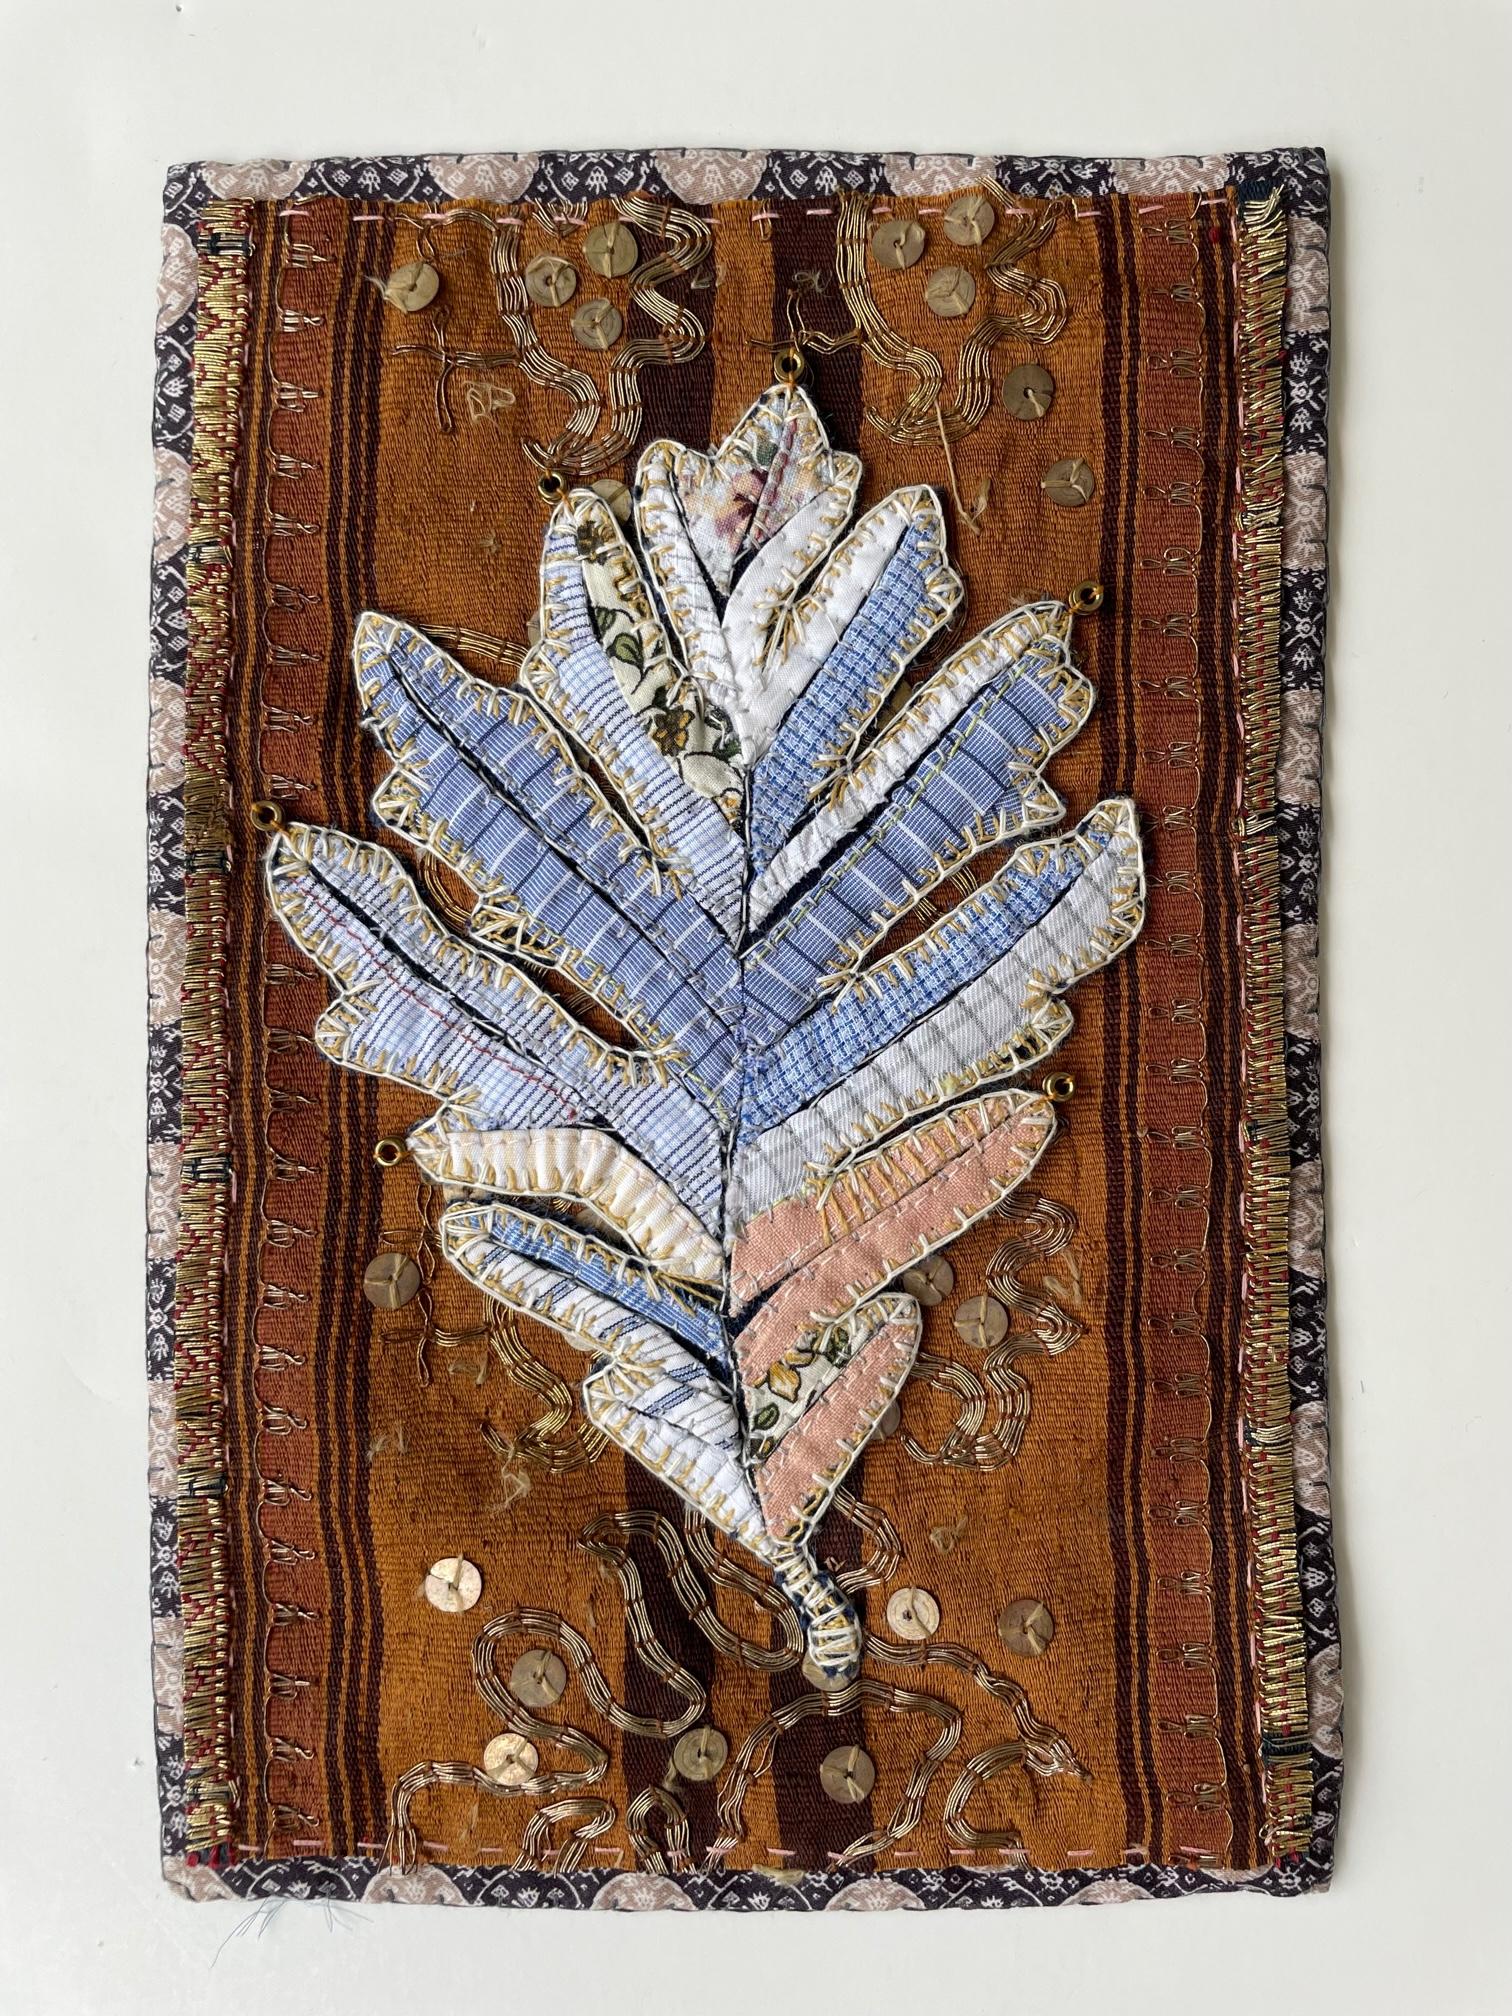 Tailored Herbaria Quercus Alba Blind Brook Watershed One, Botanical Textile - Mixed Media Art by Donna Sharrett